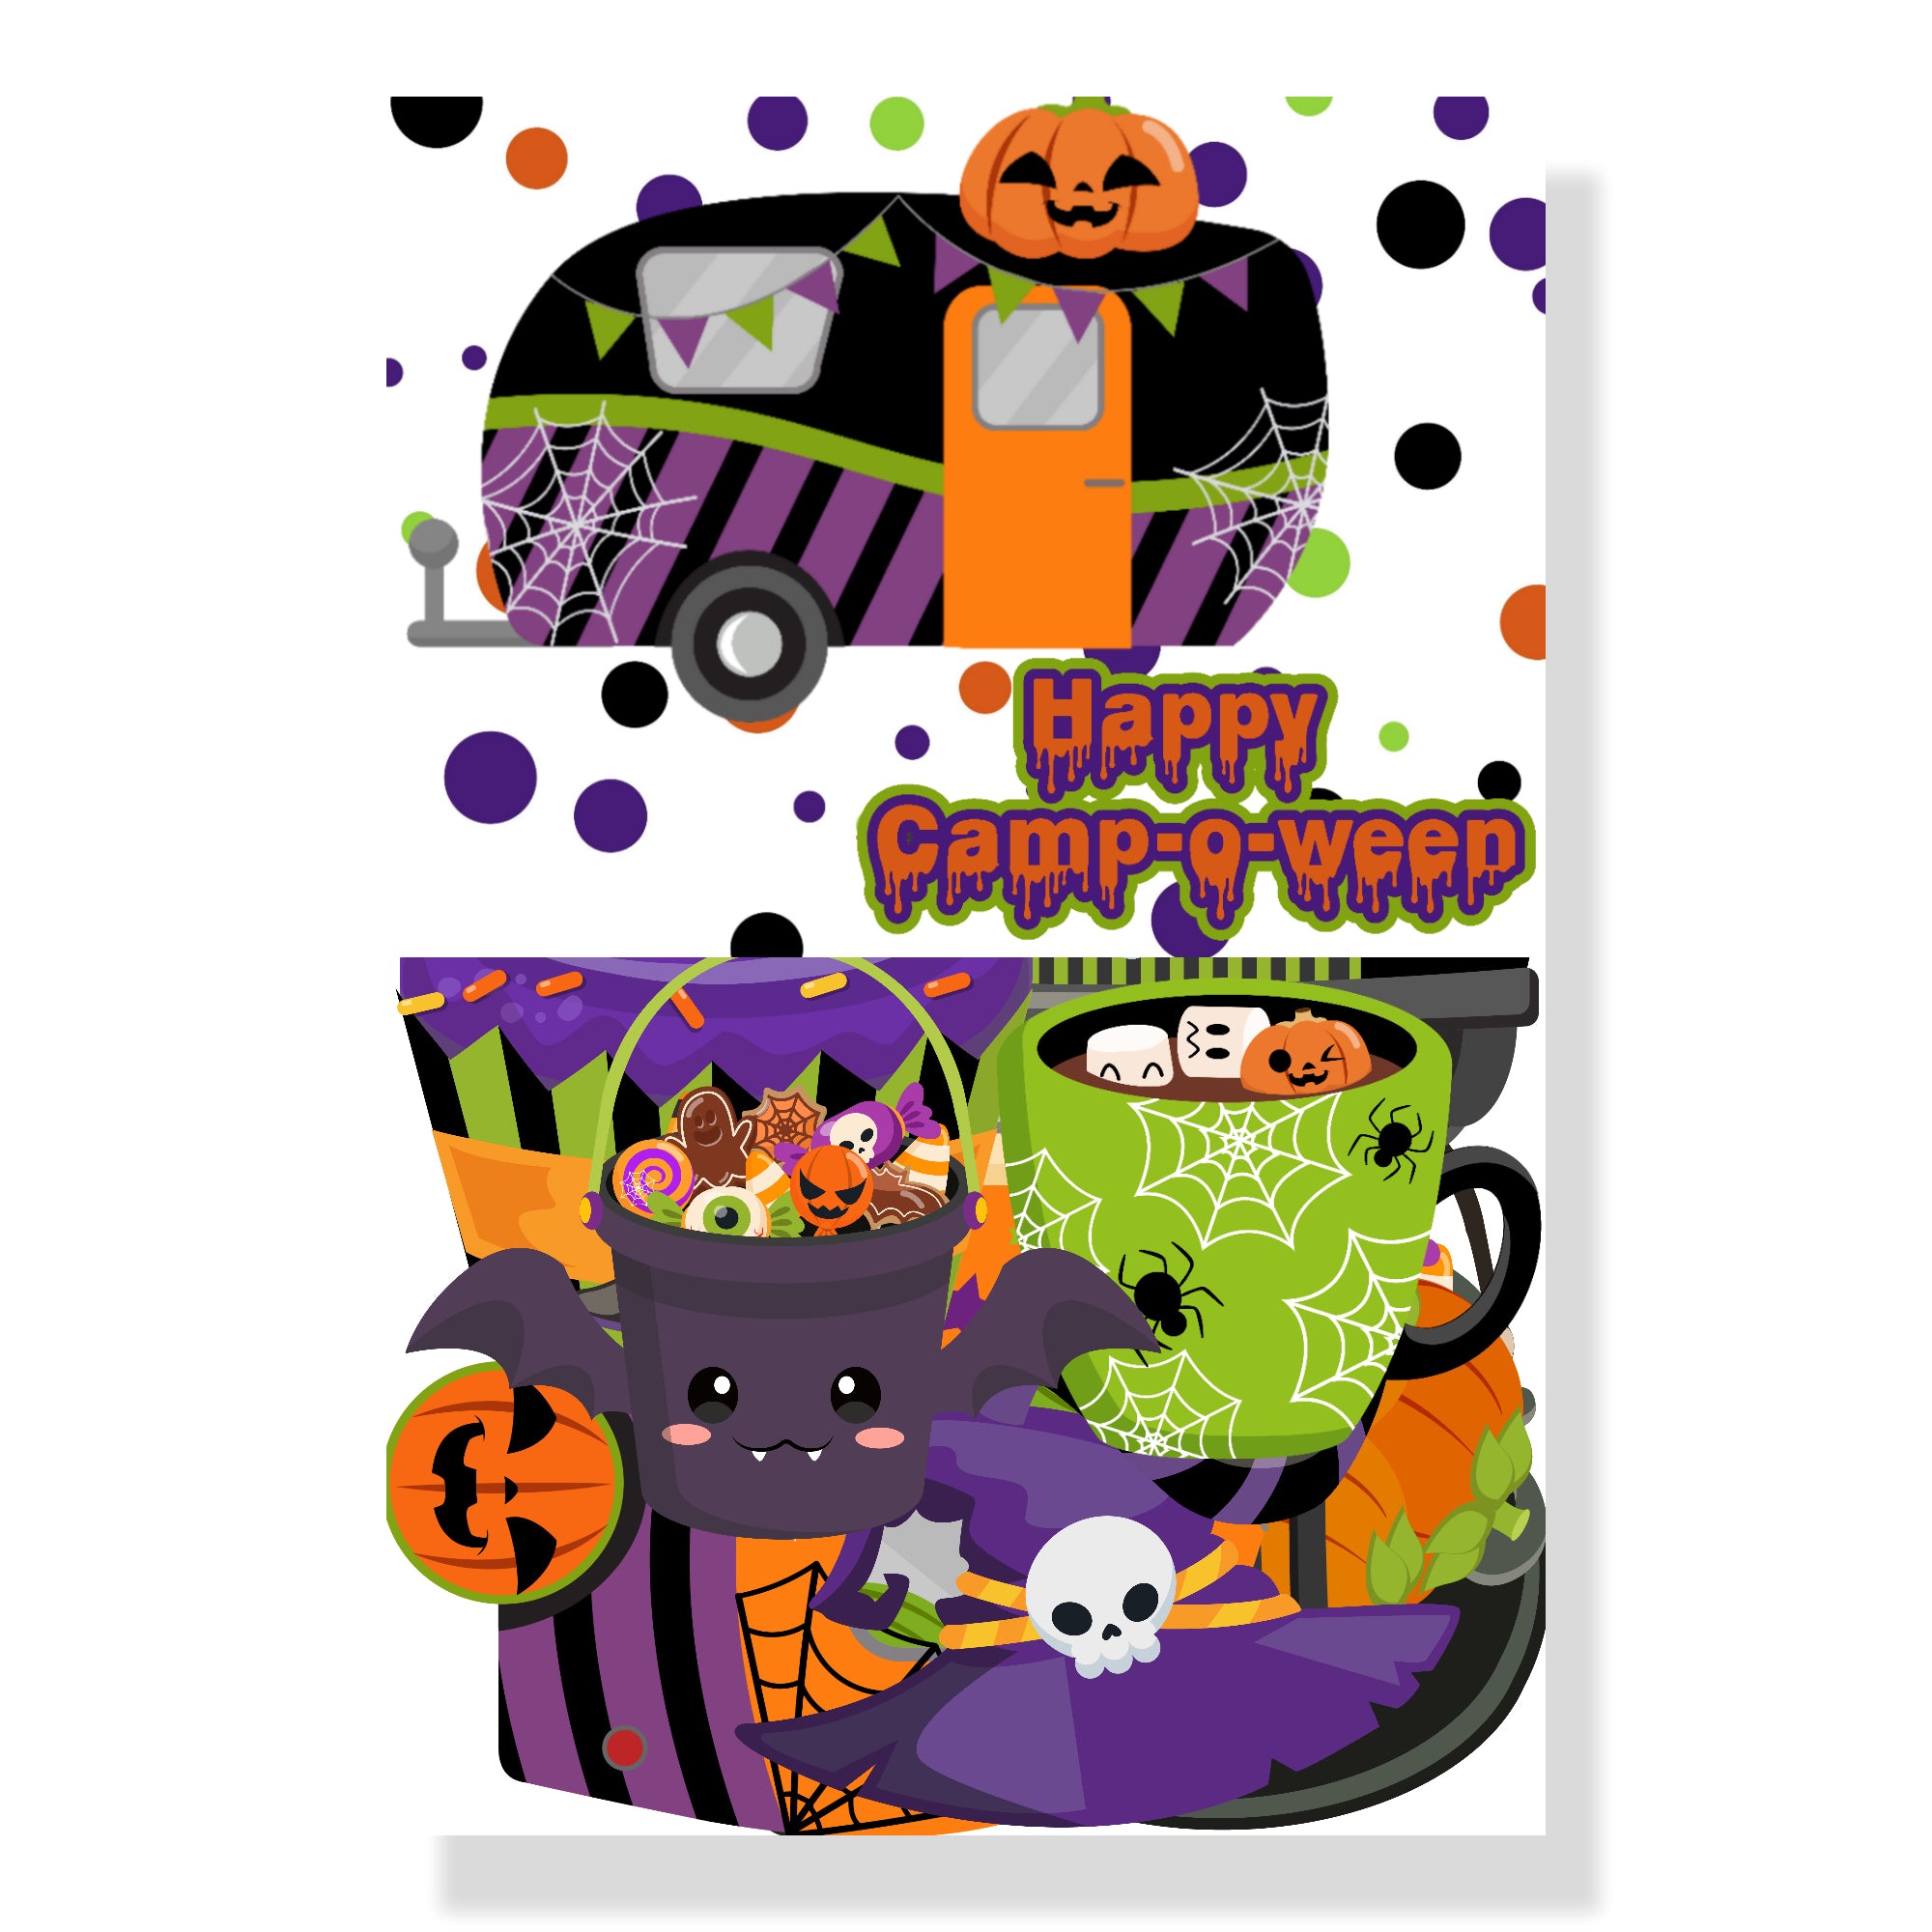 Happy Camp-o-ween Collection Laser Cut Ephemera Embellishments by SSC Designs